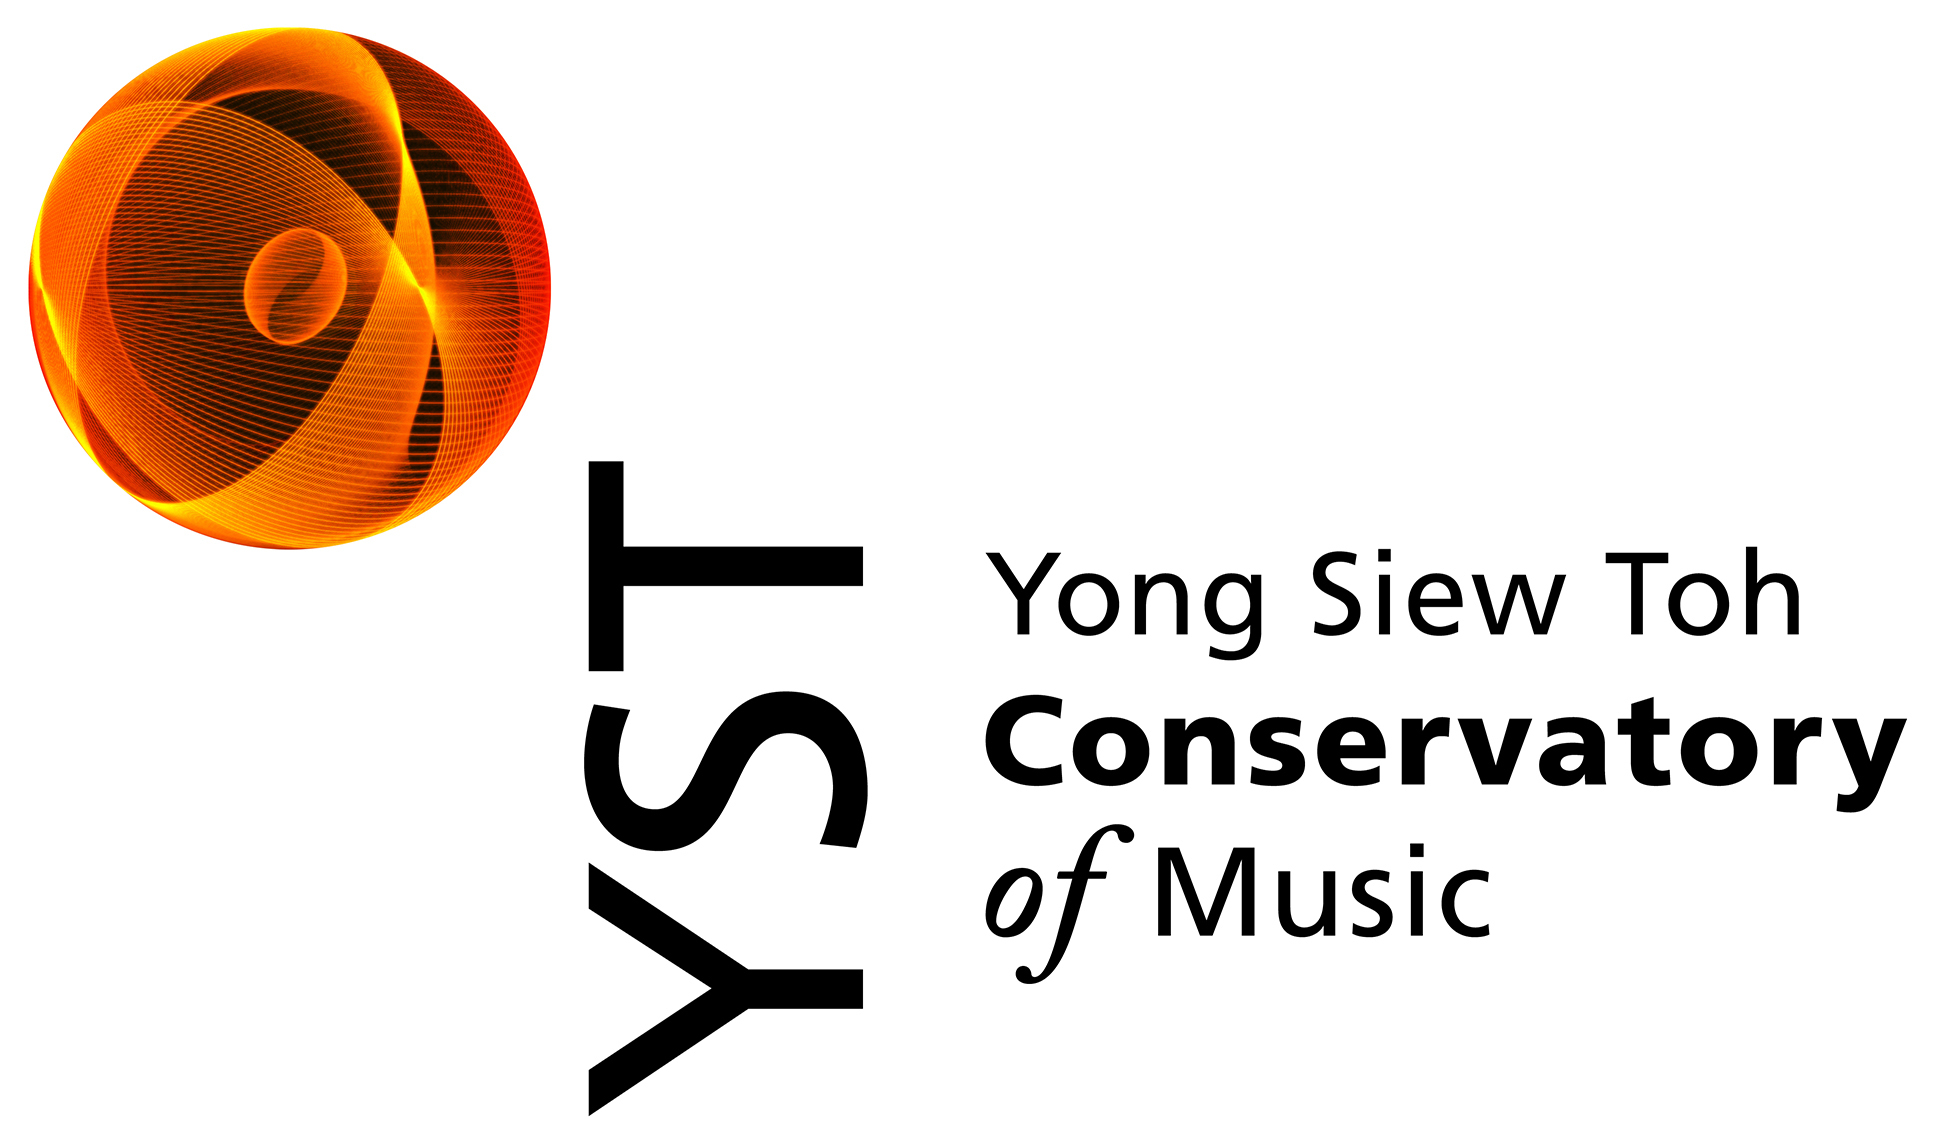 Yong Siew Toh Conservatory of Music, National University of Singapore